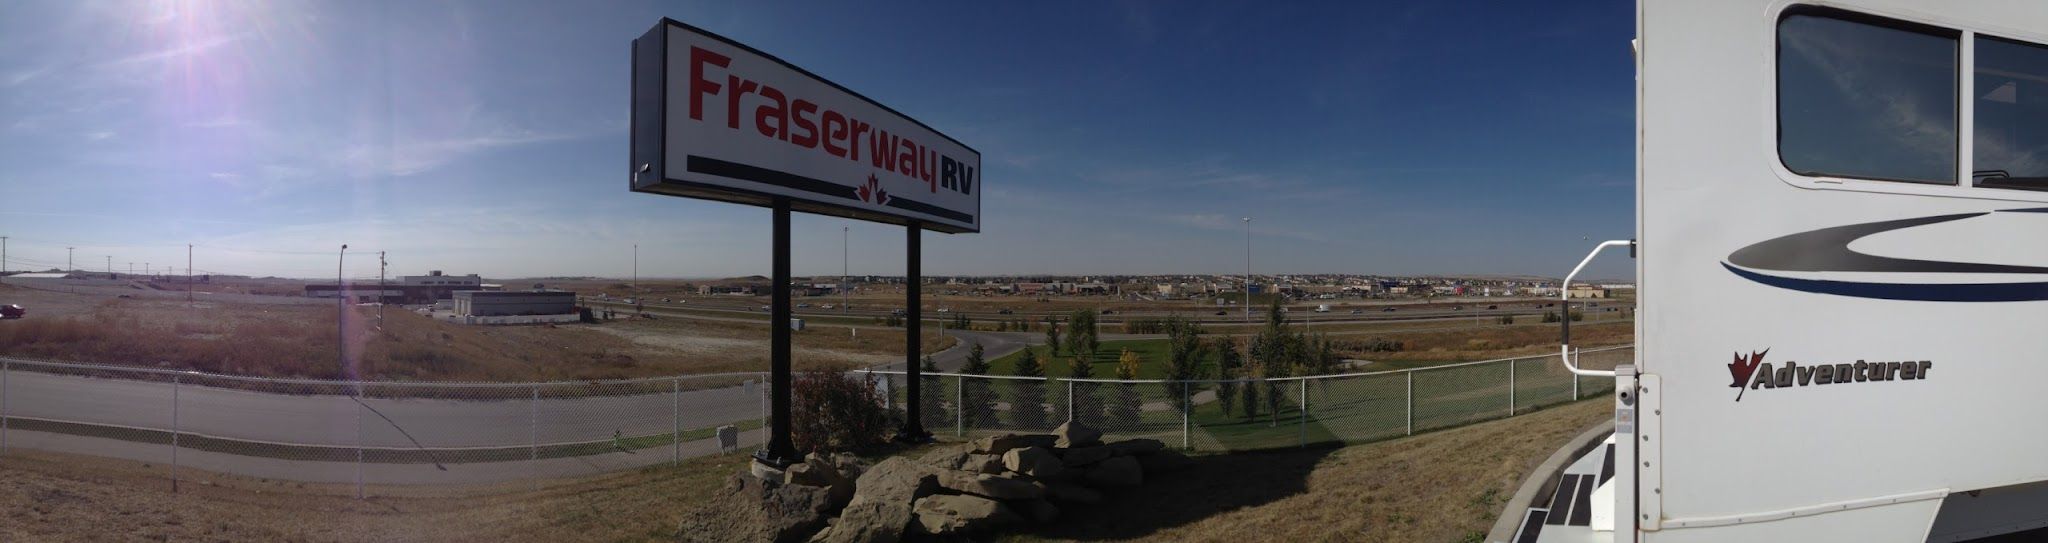 Services & Products Fraserway RV Airdrie in Airdrie AB